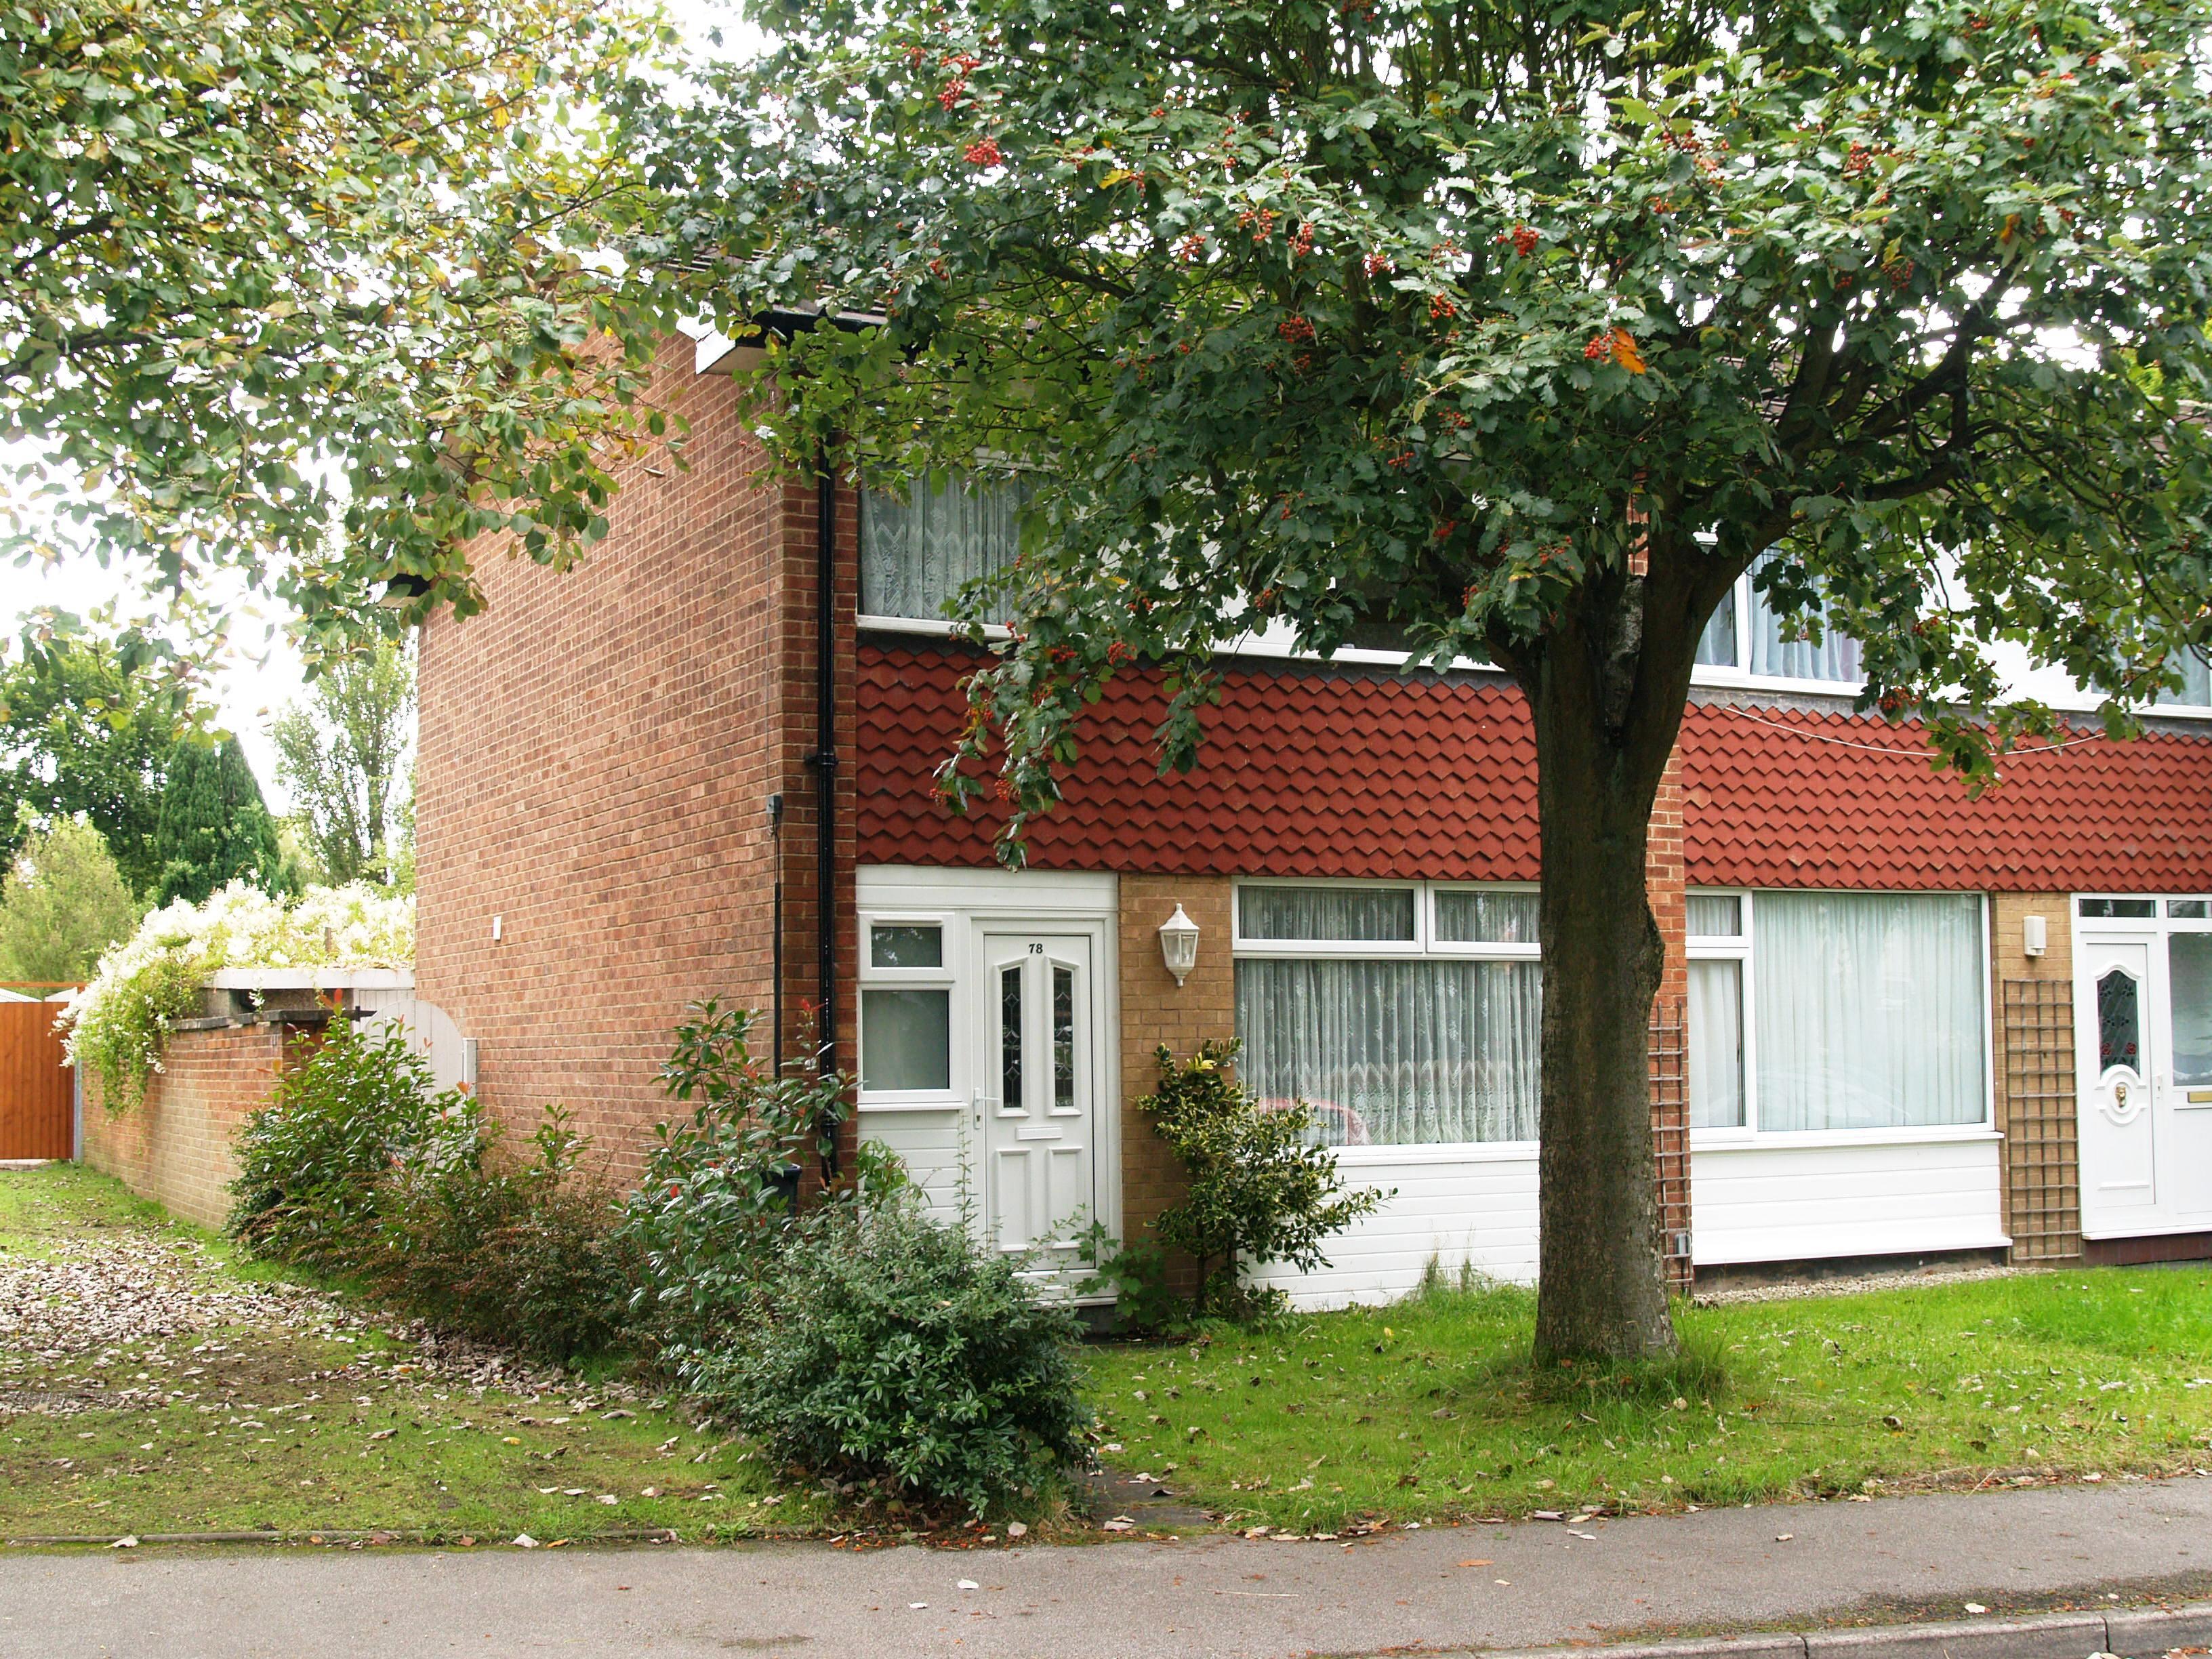 3 bedroom end terraced house SSTC in Solihull - Main Image.